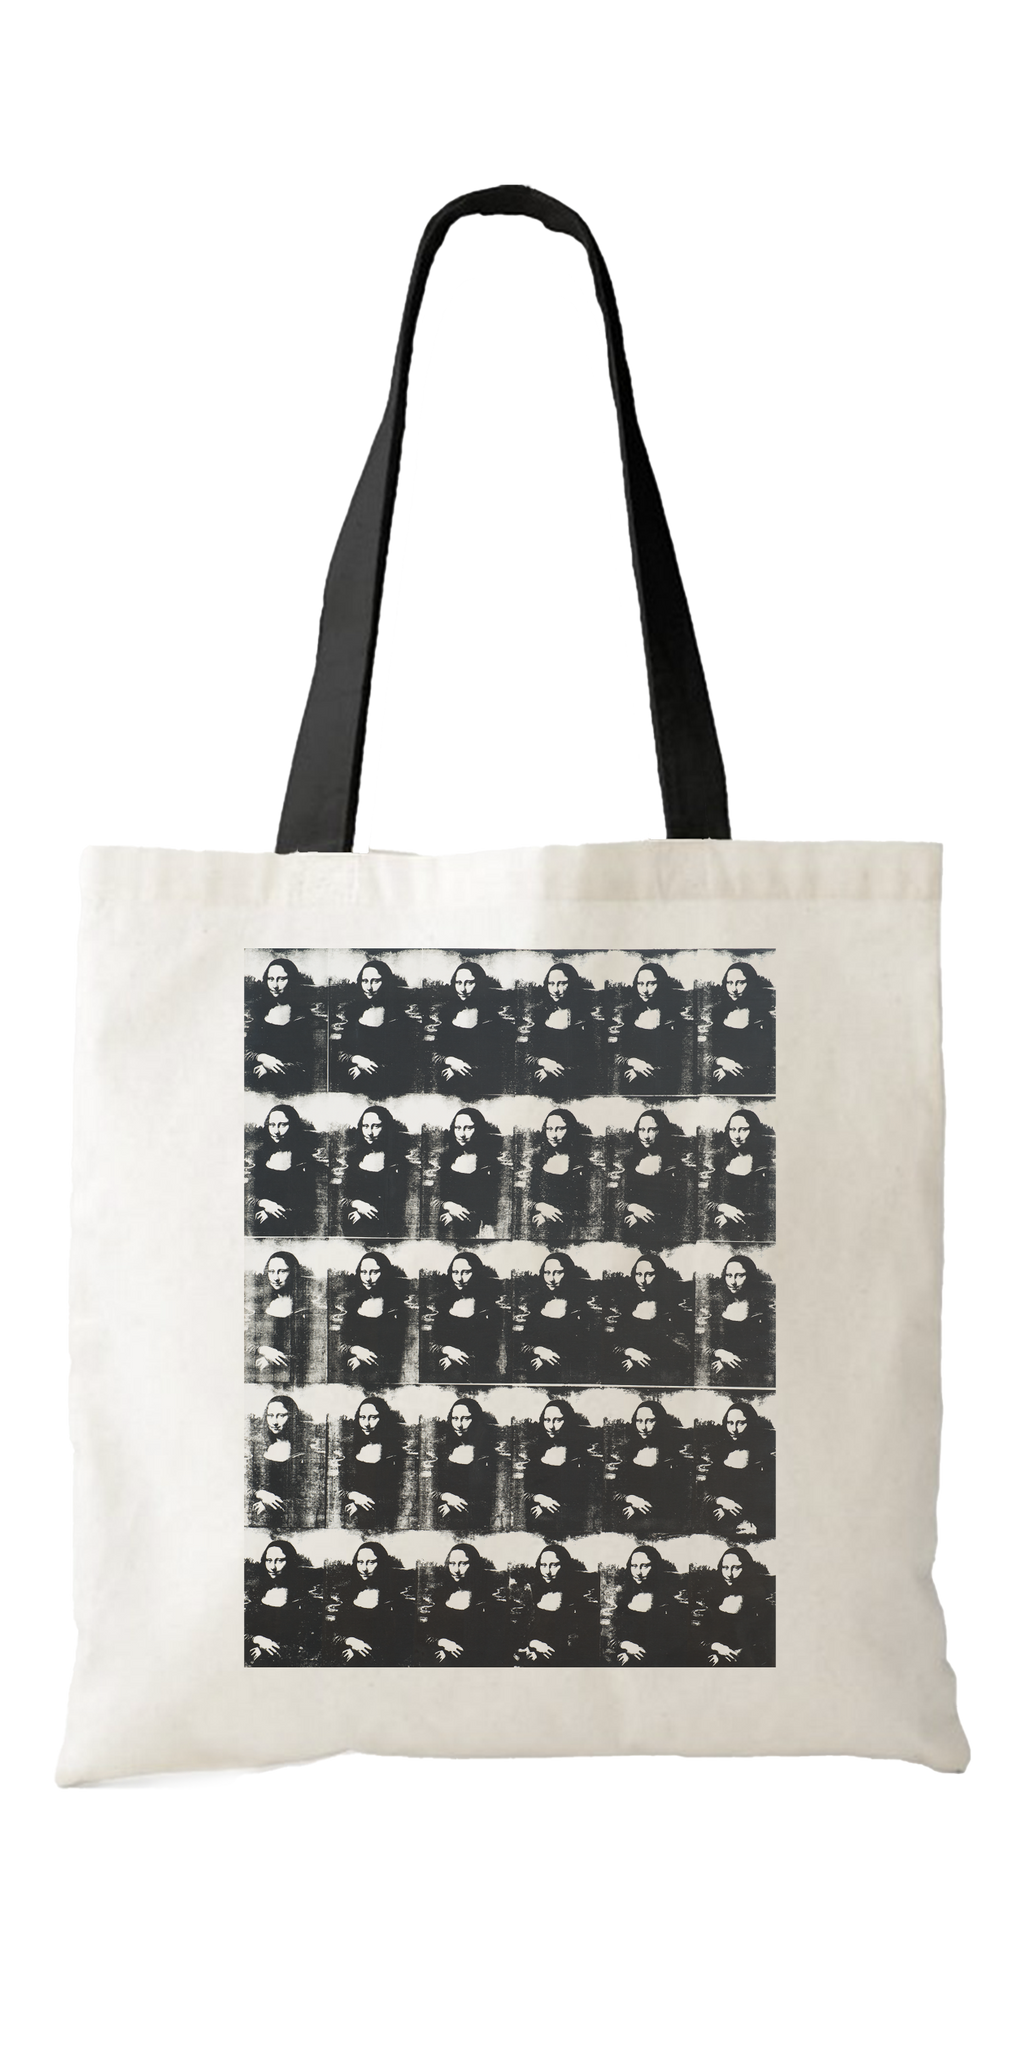 Andy Warhol "Thirty Are Better Than One" Tote Bag